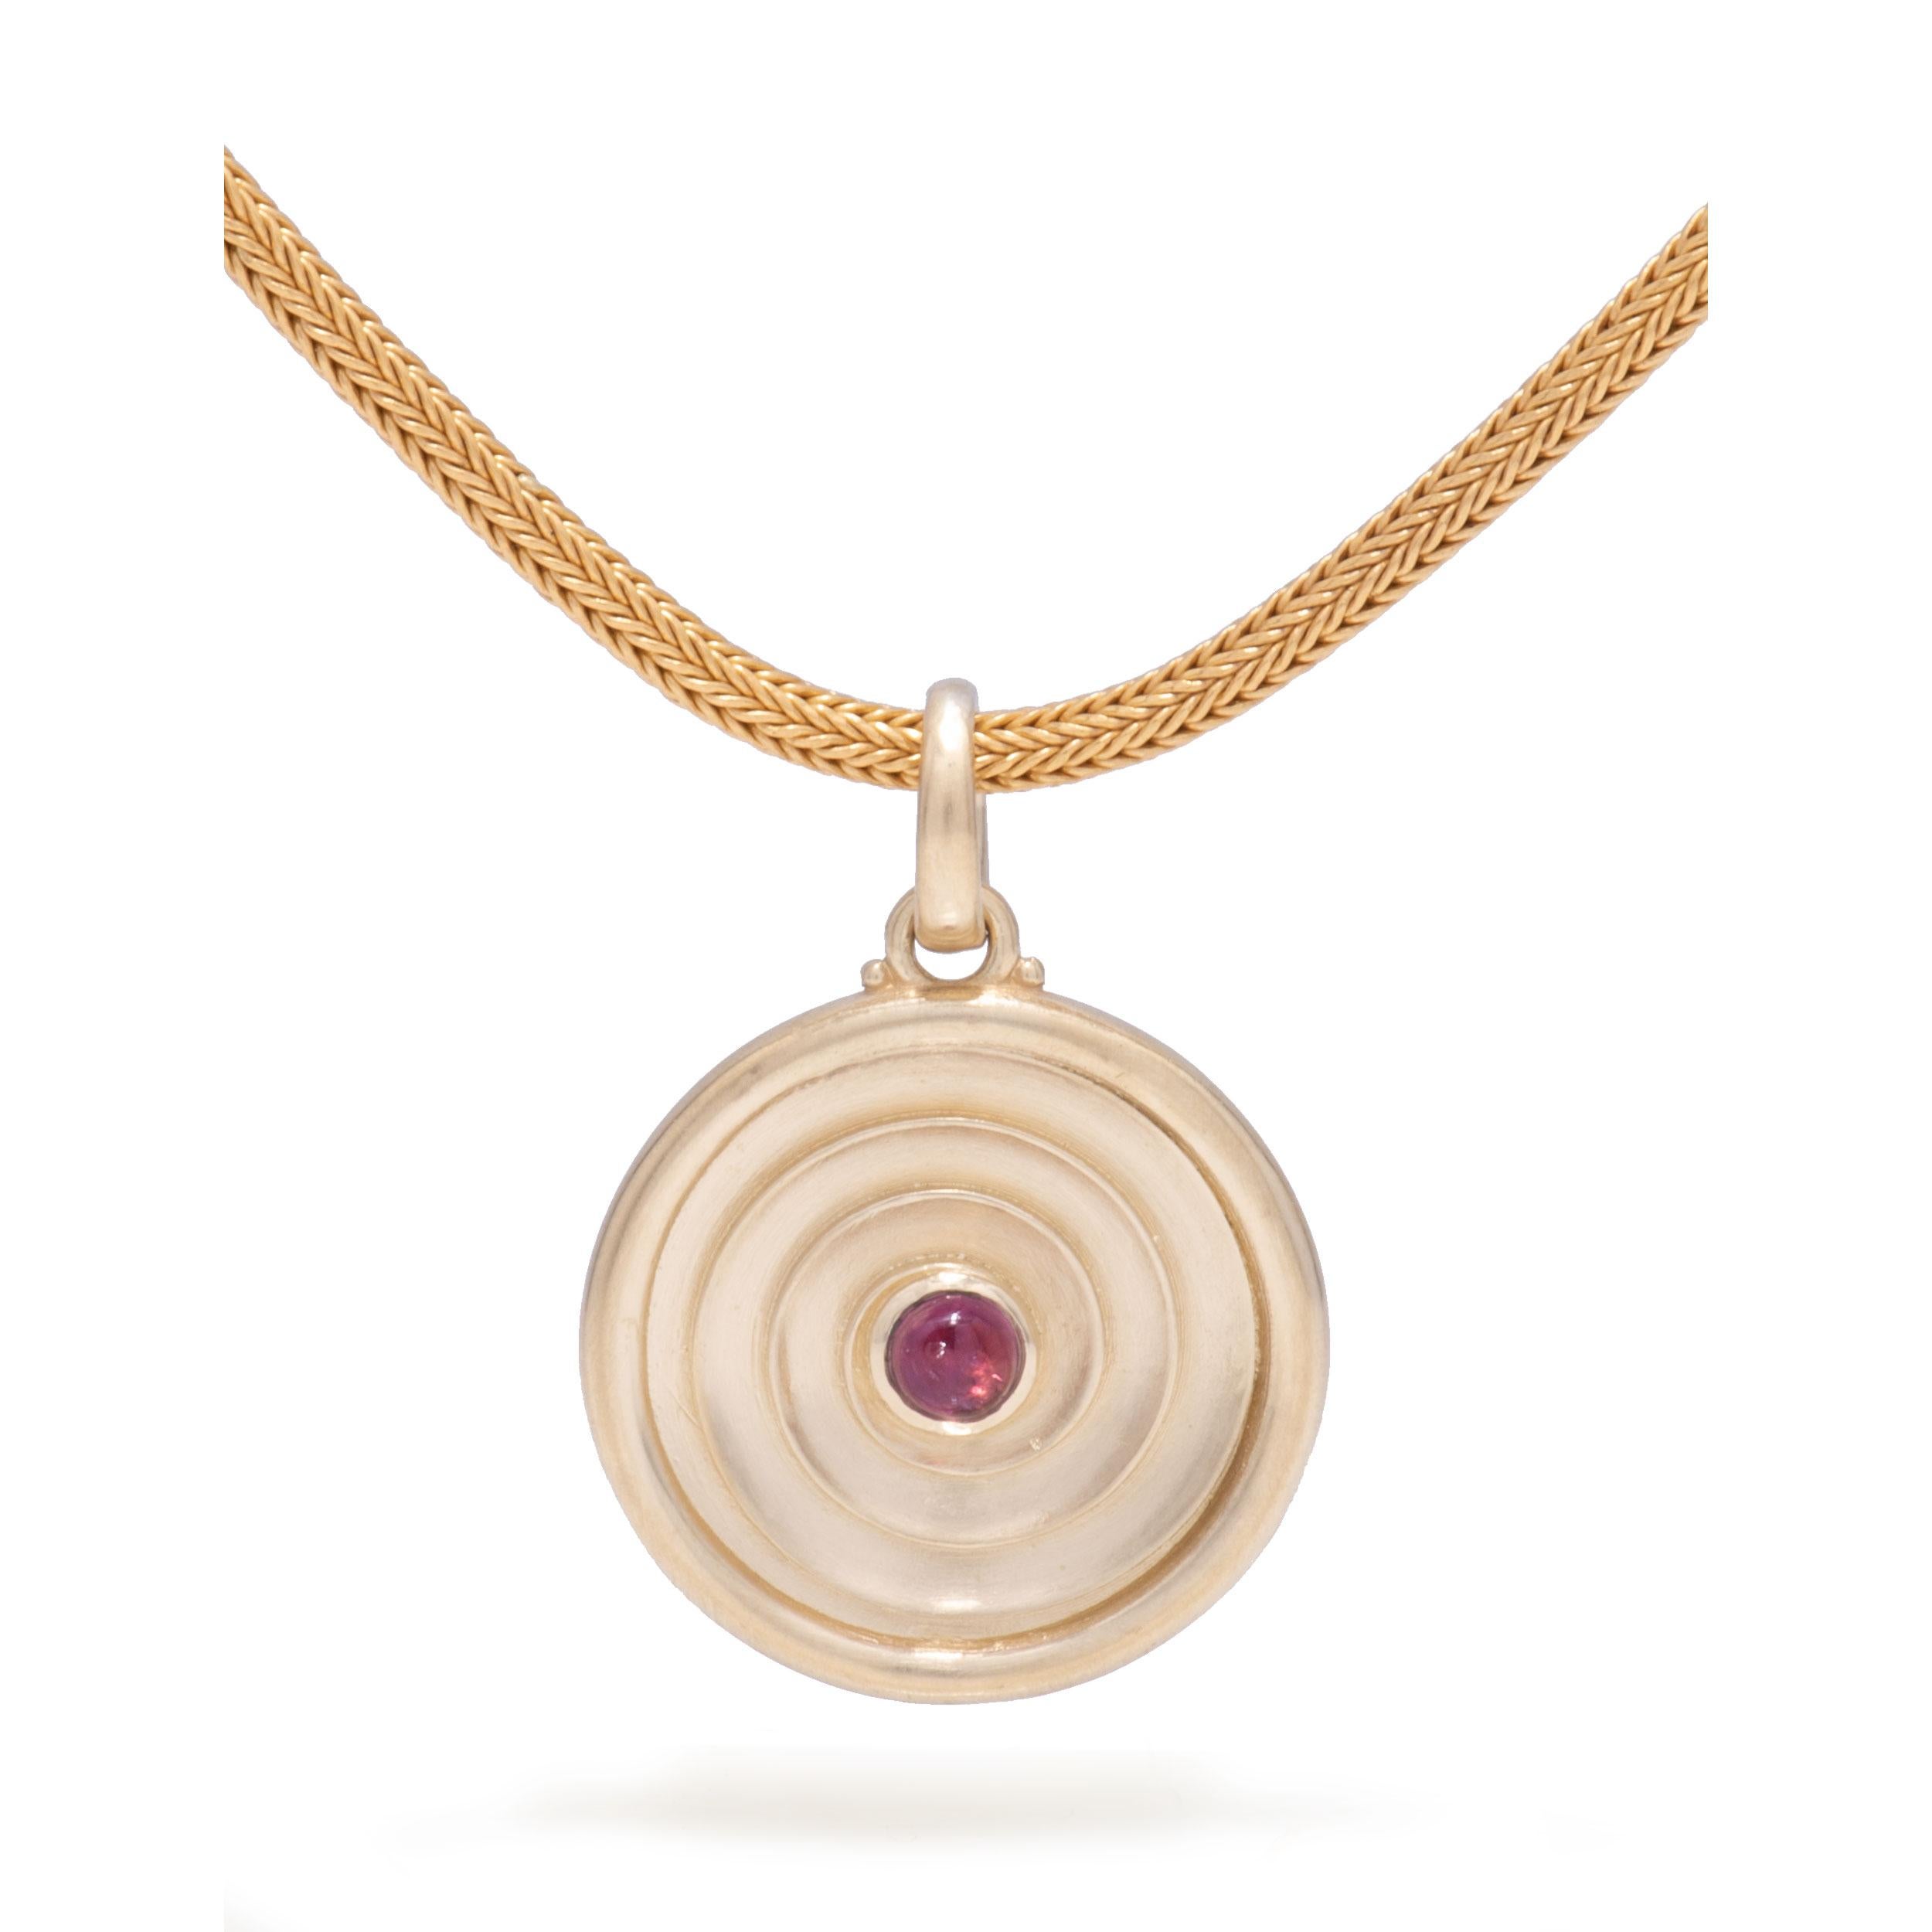 The Eye of Horus symbolizes royalty, protection and health. Crafted in 18 karat gold, a spiral on one face is centered with an eye of pink tourmaline cabochon. On the reverse, an Eye of Horus emerges from the center of this mysterious gold pendant.